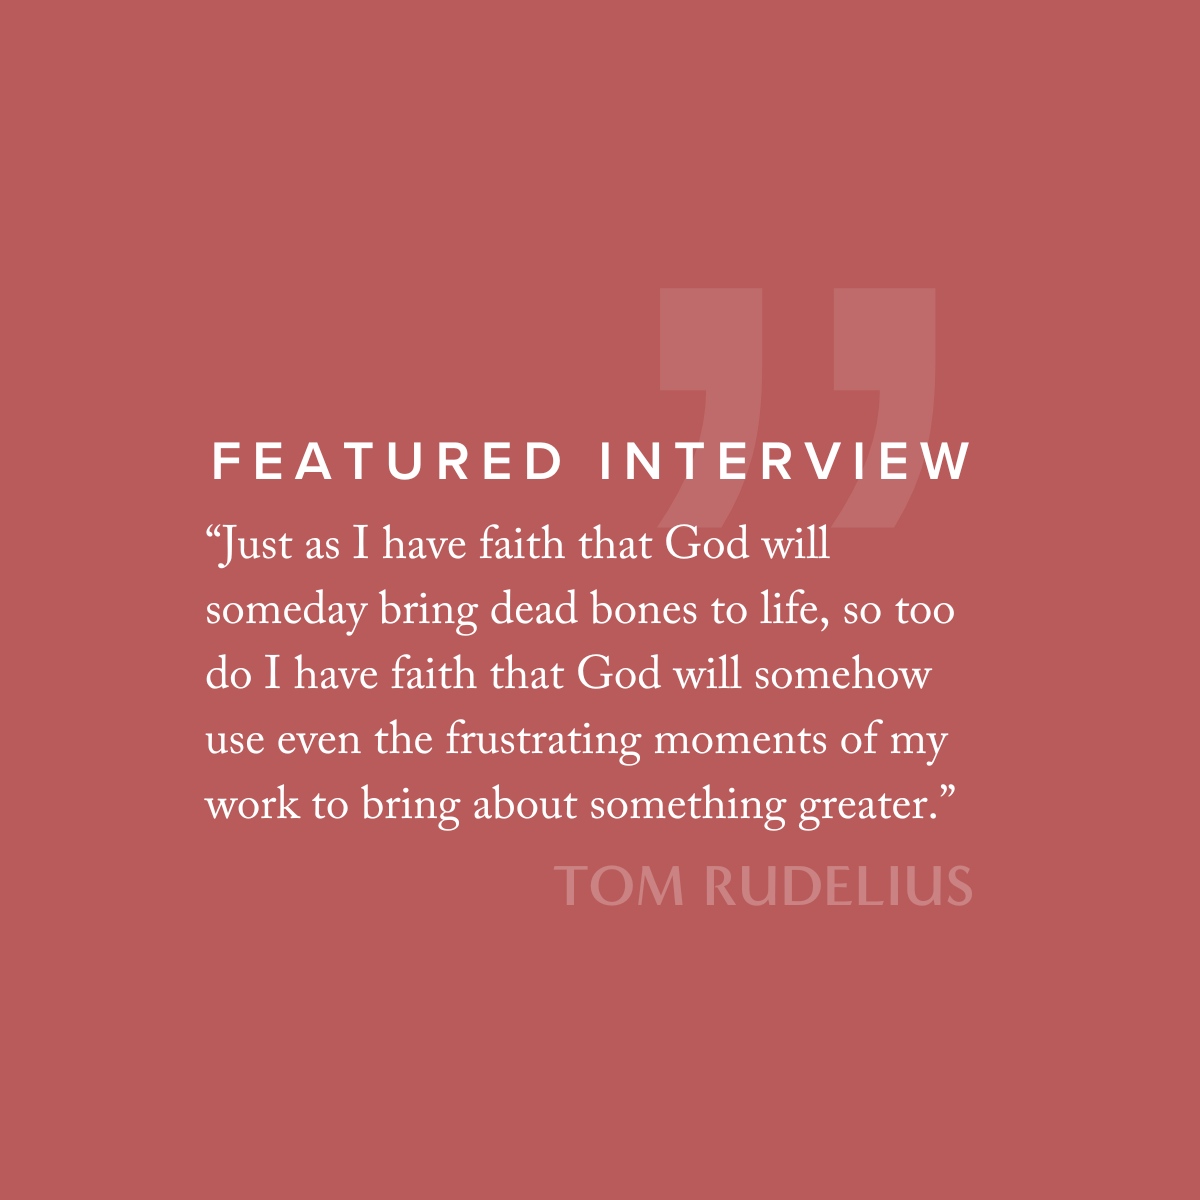 “Just as I have faith that God will someday bring dead bones to life, so too do I have faith that God will somehow use even the frustrating moments of my work to bring about something greater.” - @RudeliusTom

raptinterviews.com/features/tom-r…